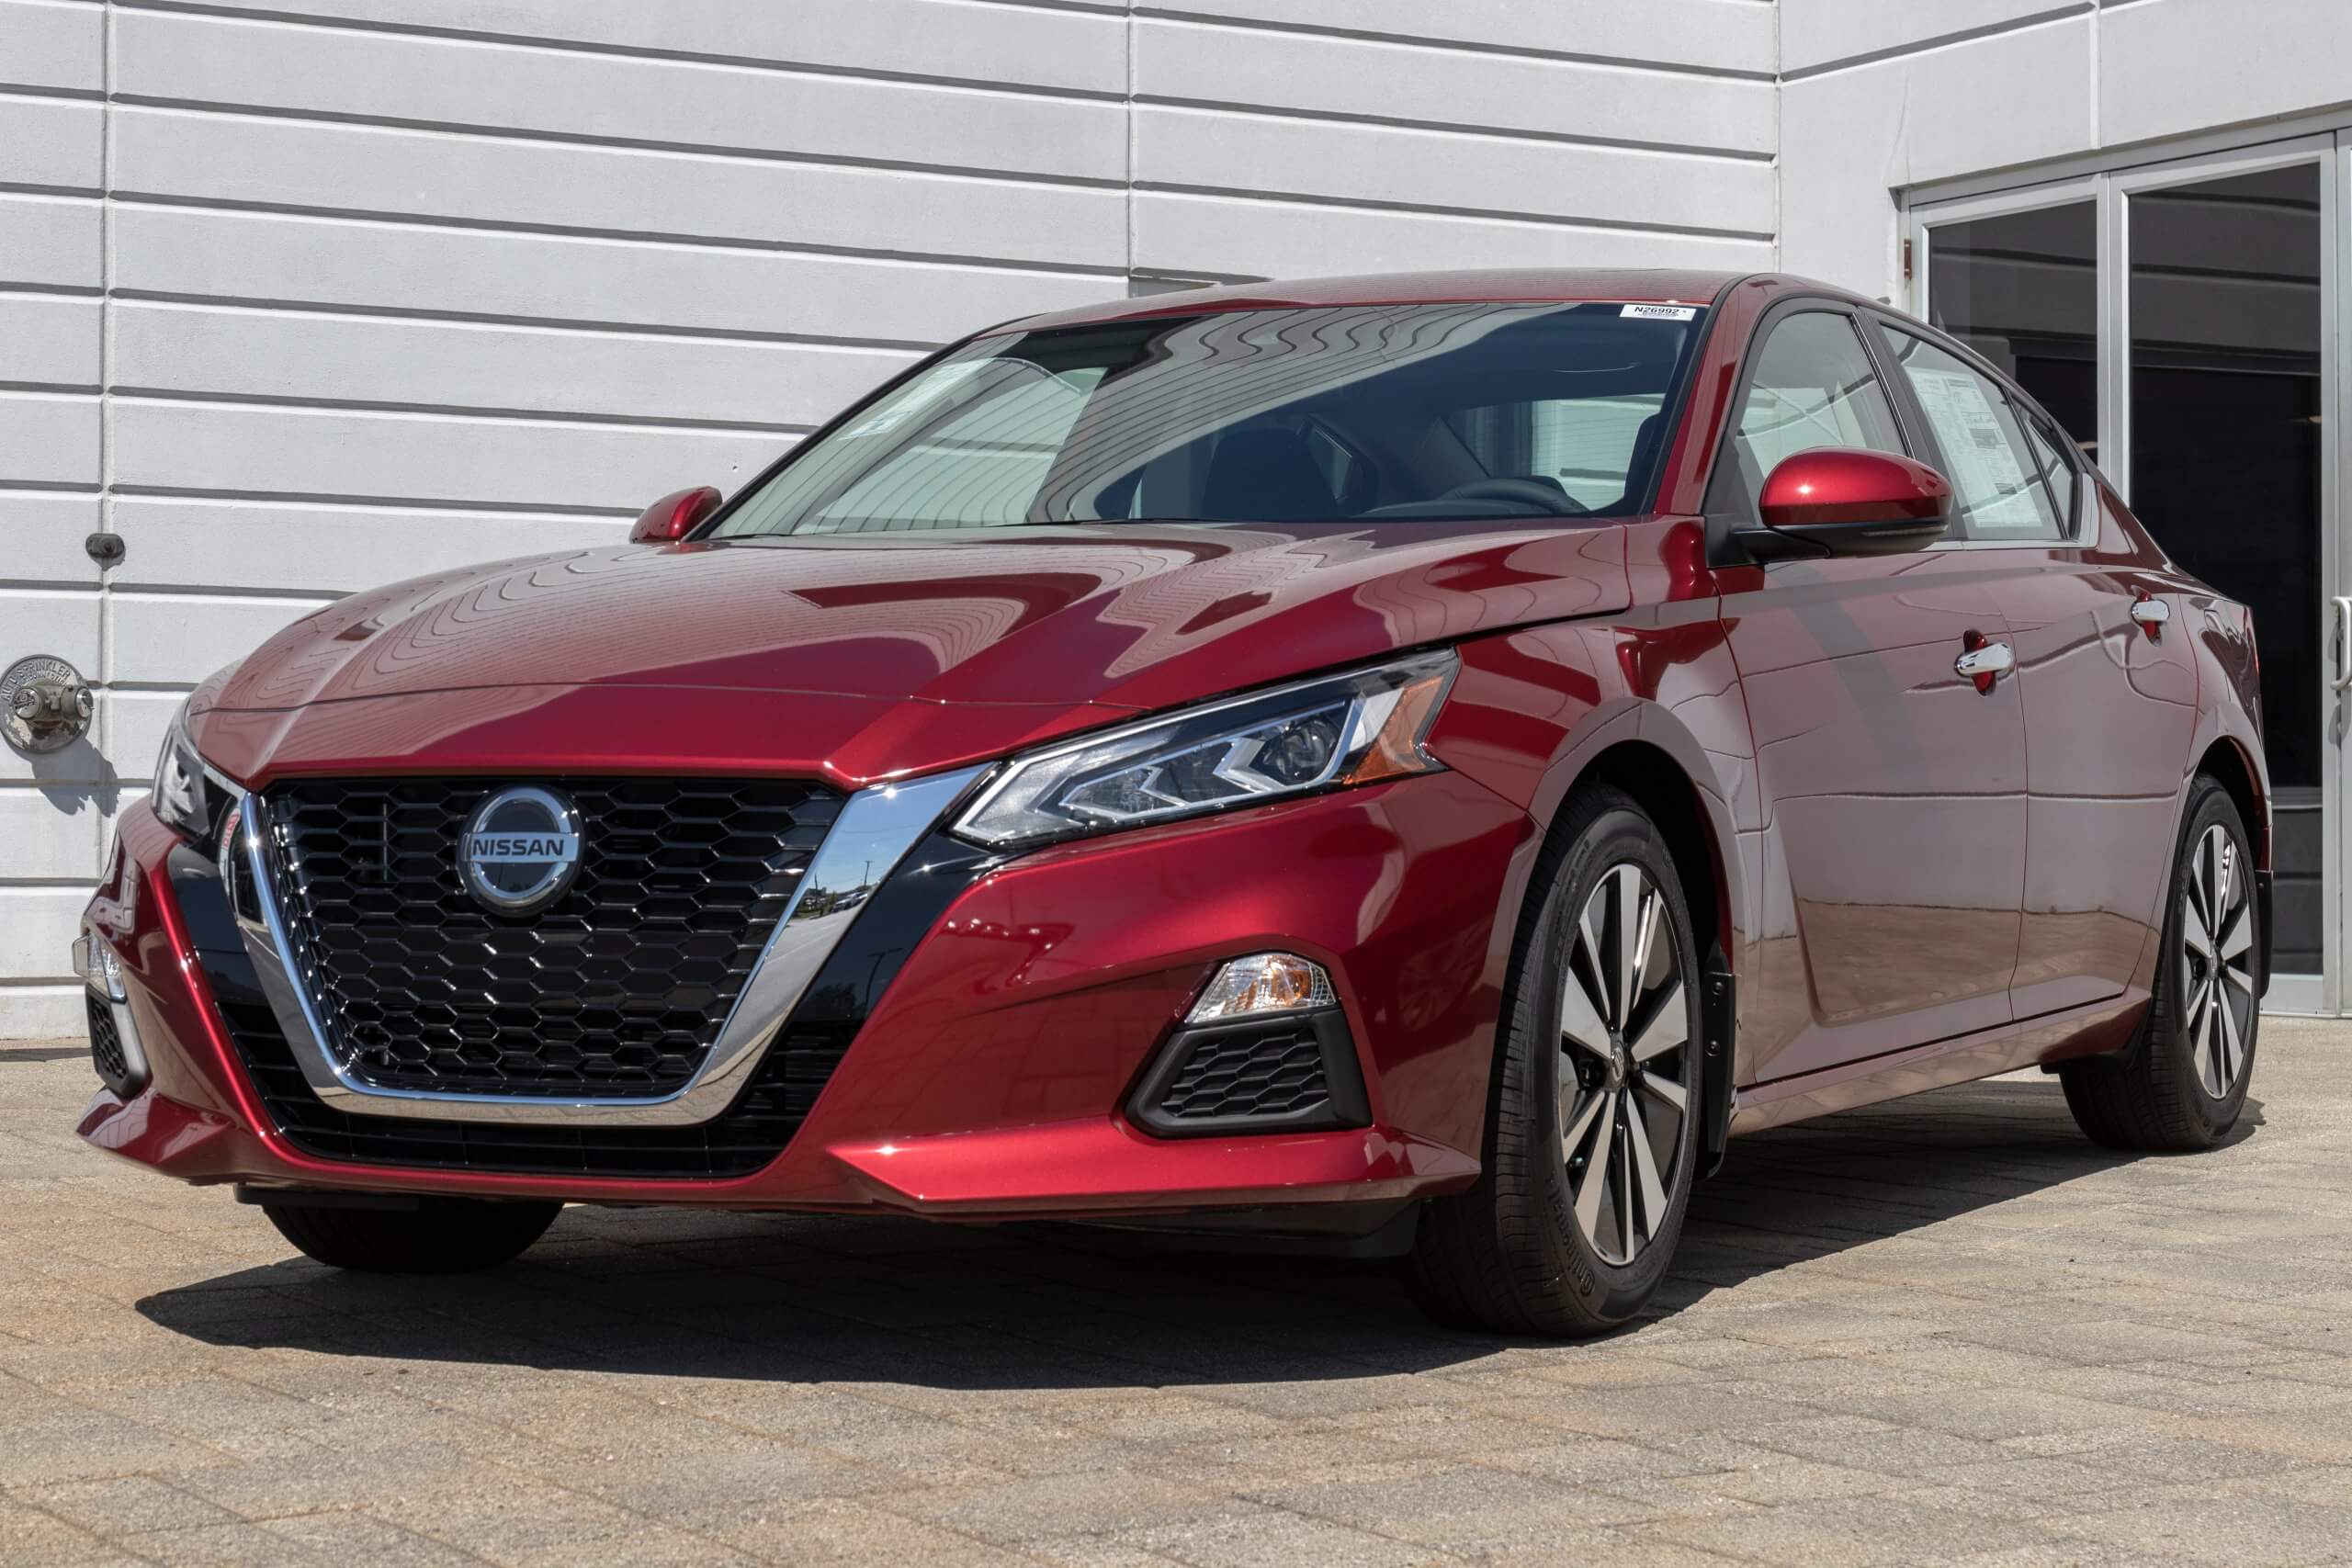 2019 Red Nissan Altima display at a dealership. 